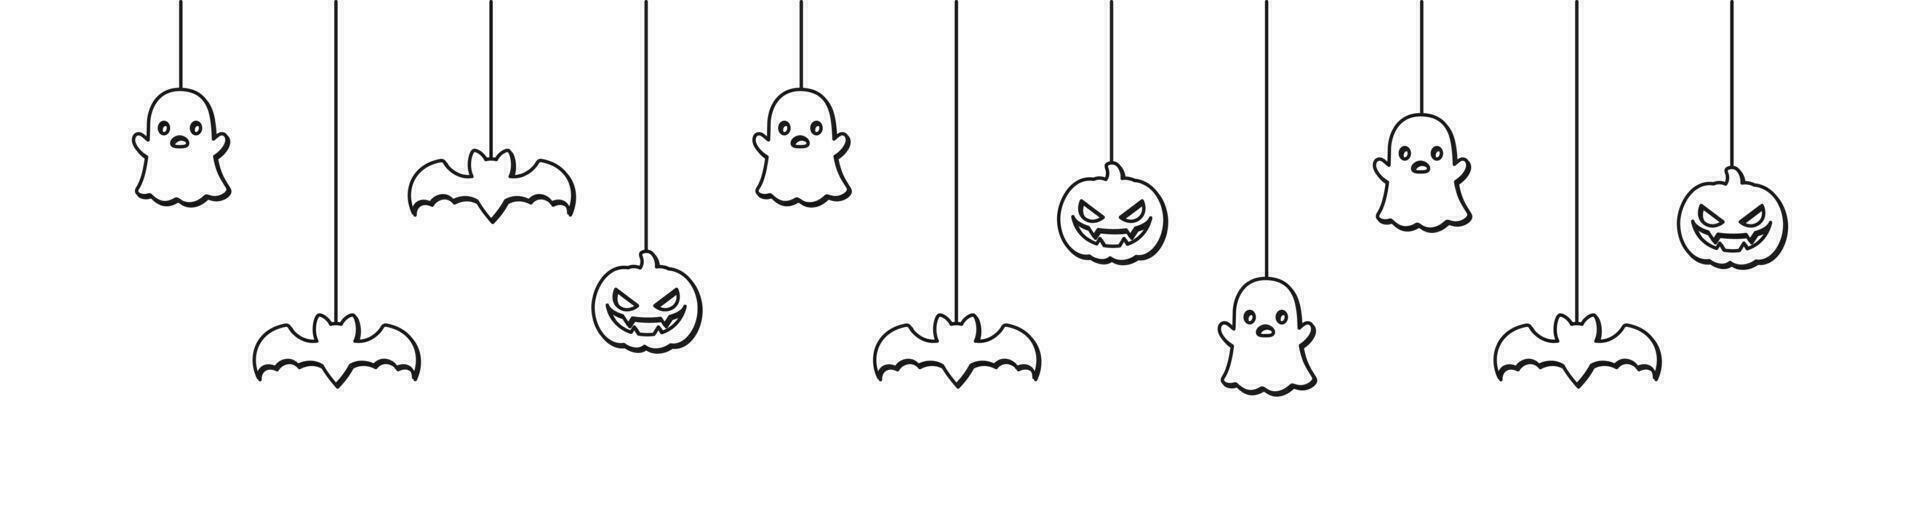 Happy Halloween banner or border with bats, spider web, ghost and jack o lantern pumpkins outline doodle. Hanging Spooky Ornaments Decoration Vector illustration, trick or treat party invitation